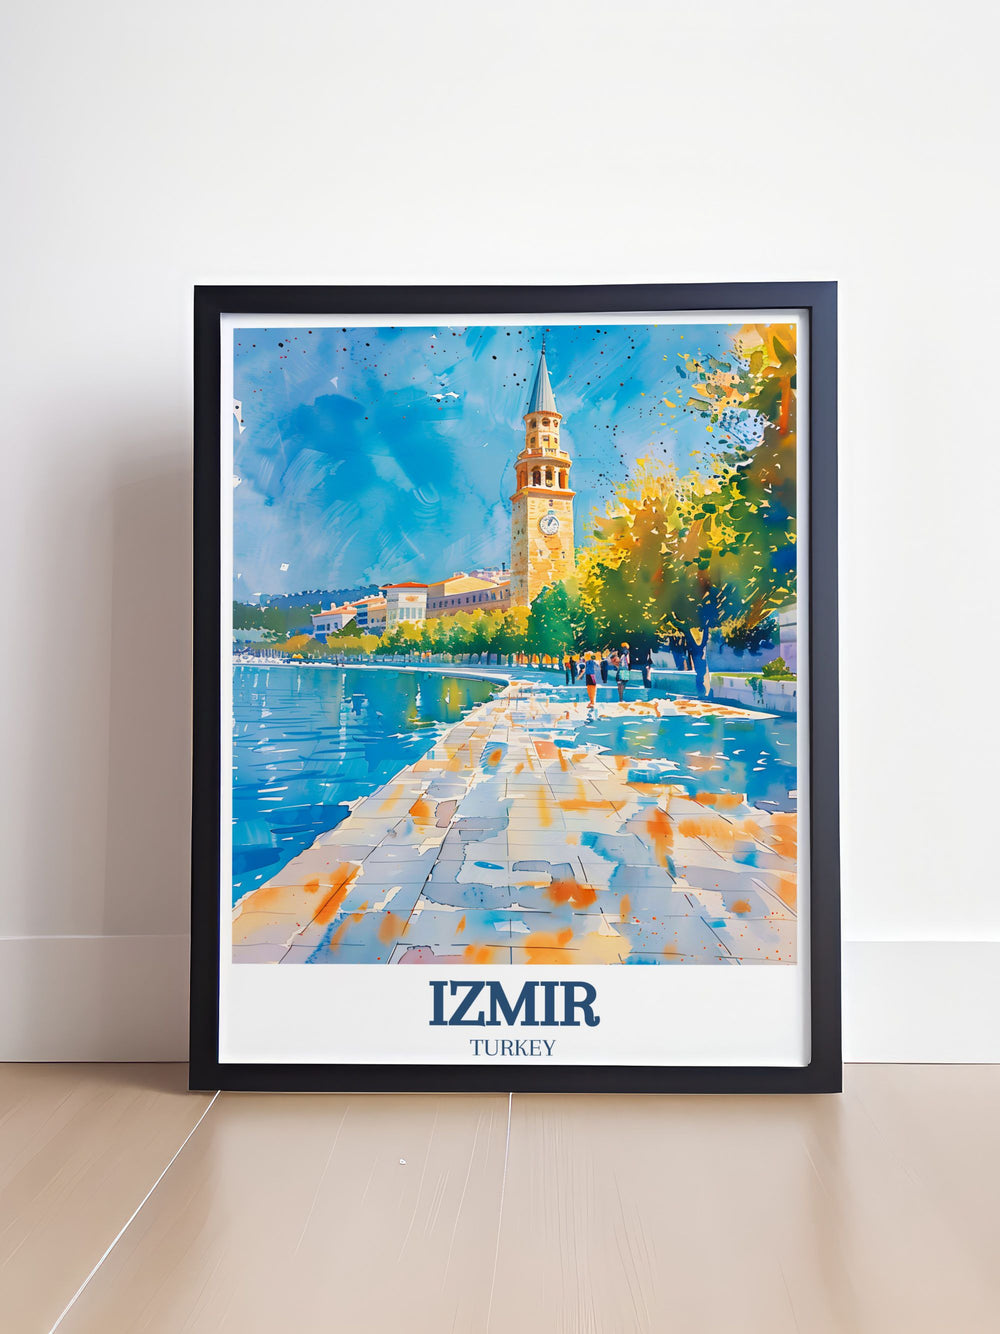 The intricate details of the Clock Tower and the scenic Kordon Promenade are showcased in this art print, perfect for adding a touch of Izmirs charm to your home decor.